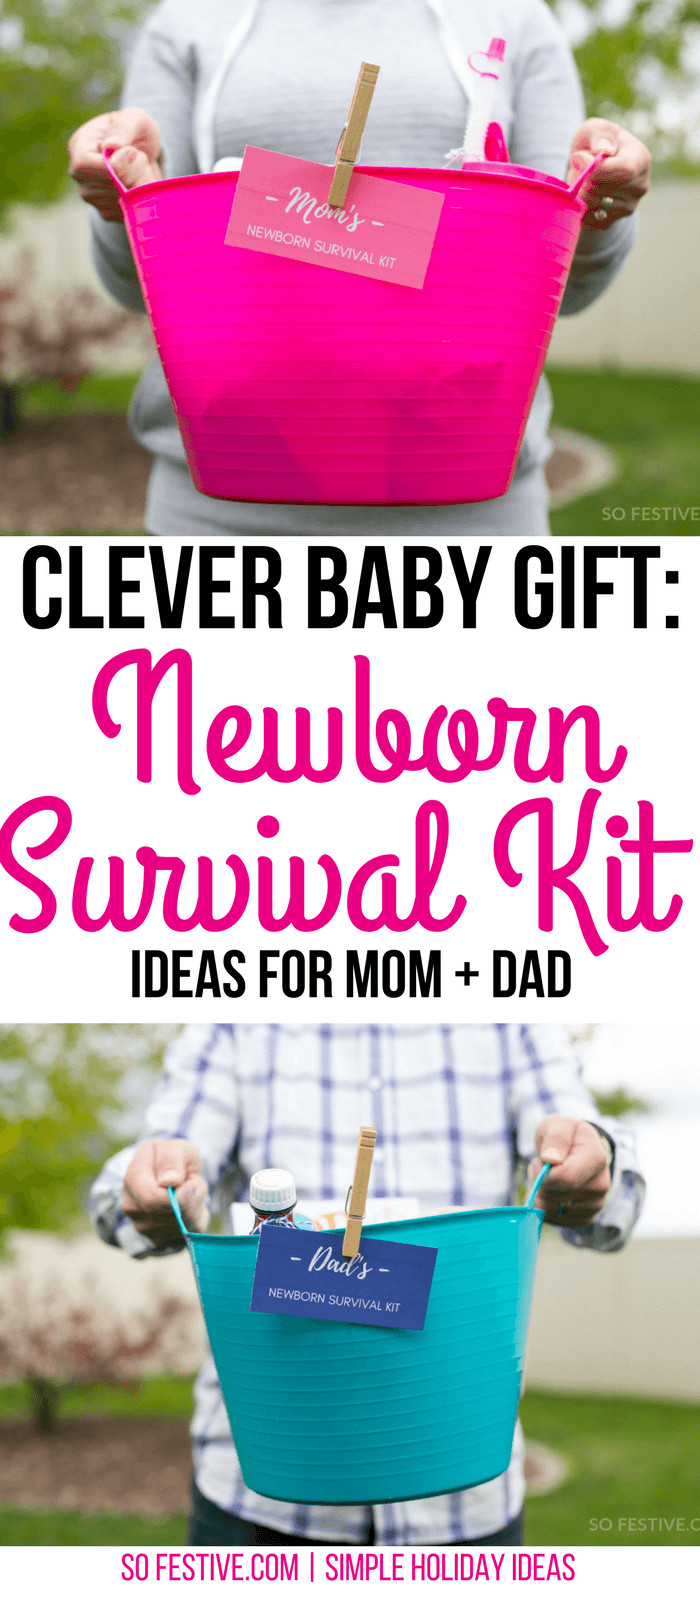 New Baby Gift Ideas
 How to Make a Newborn Survival Kit for a Baby Shower Gift